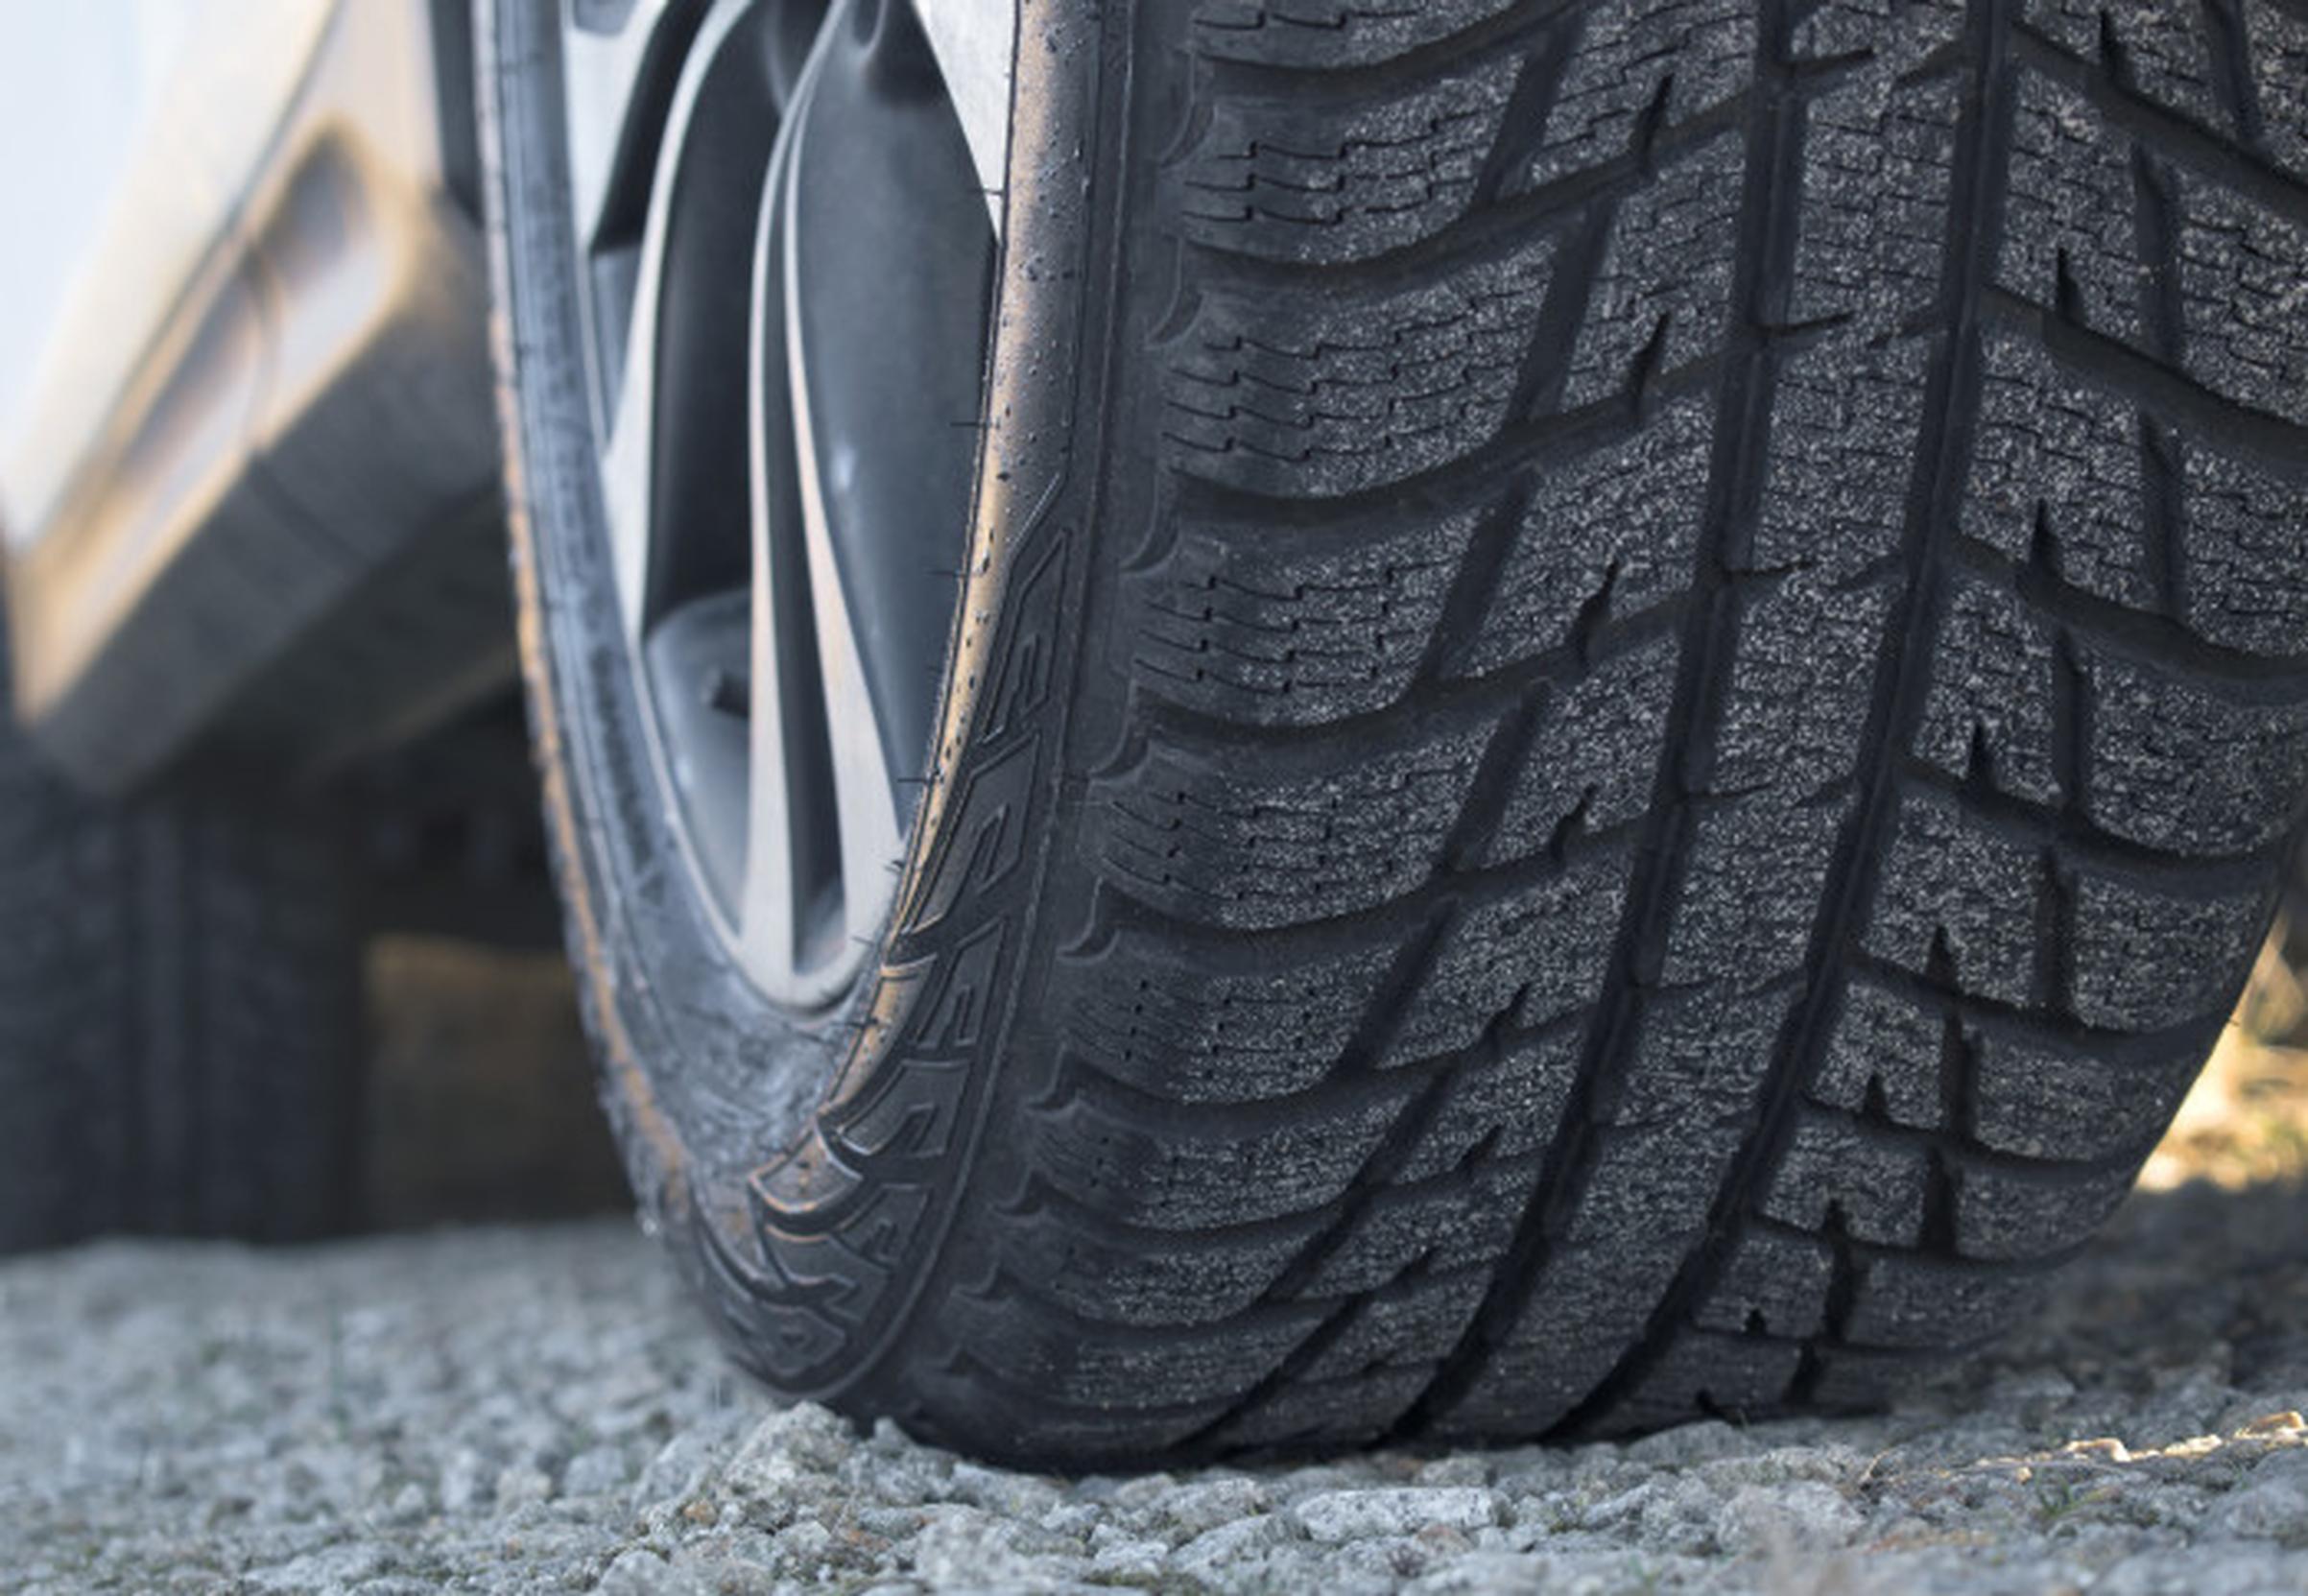 Toxic tyres pose a health risk, warns Imperial College